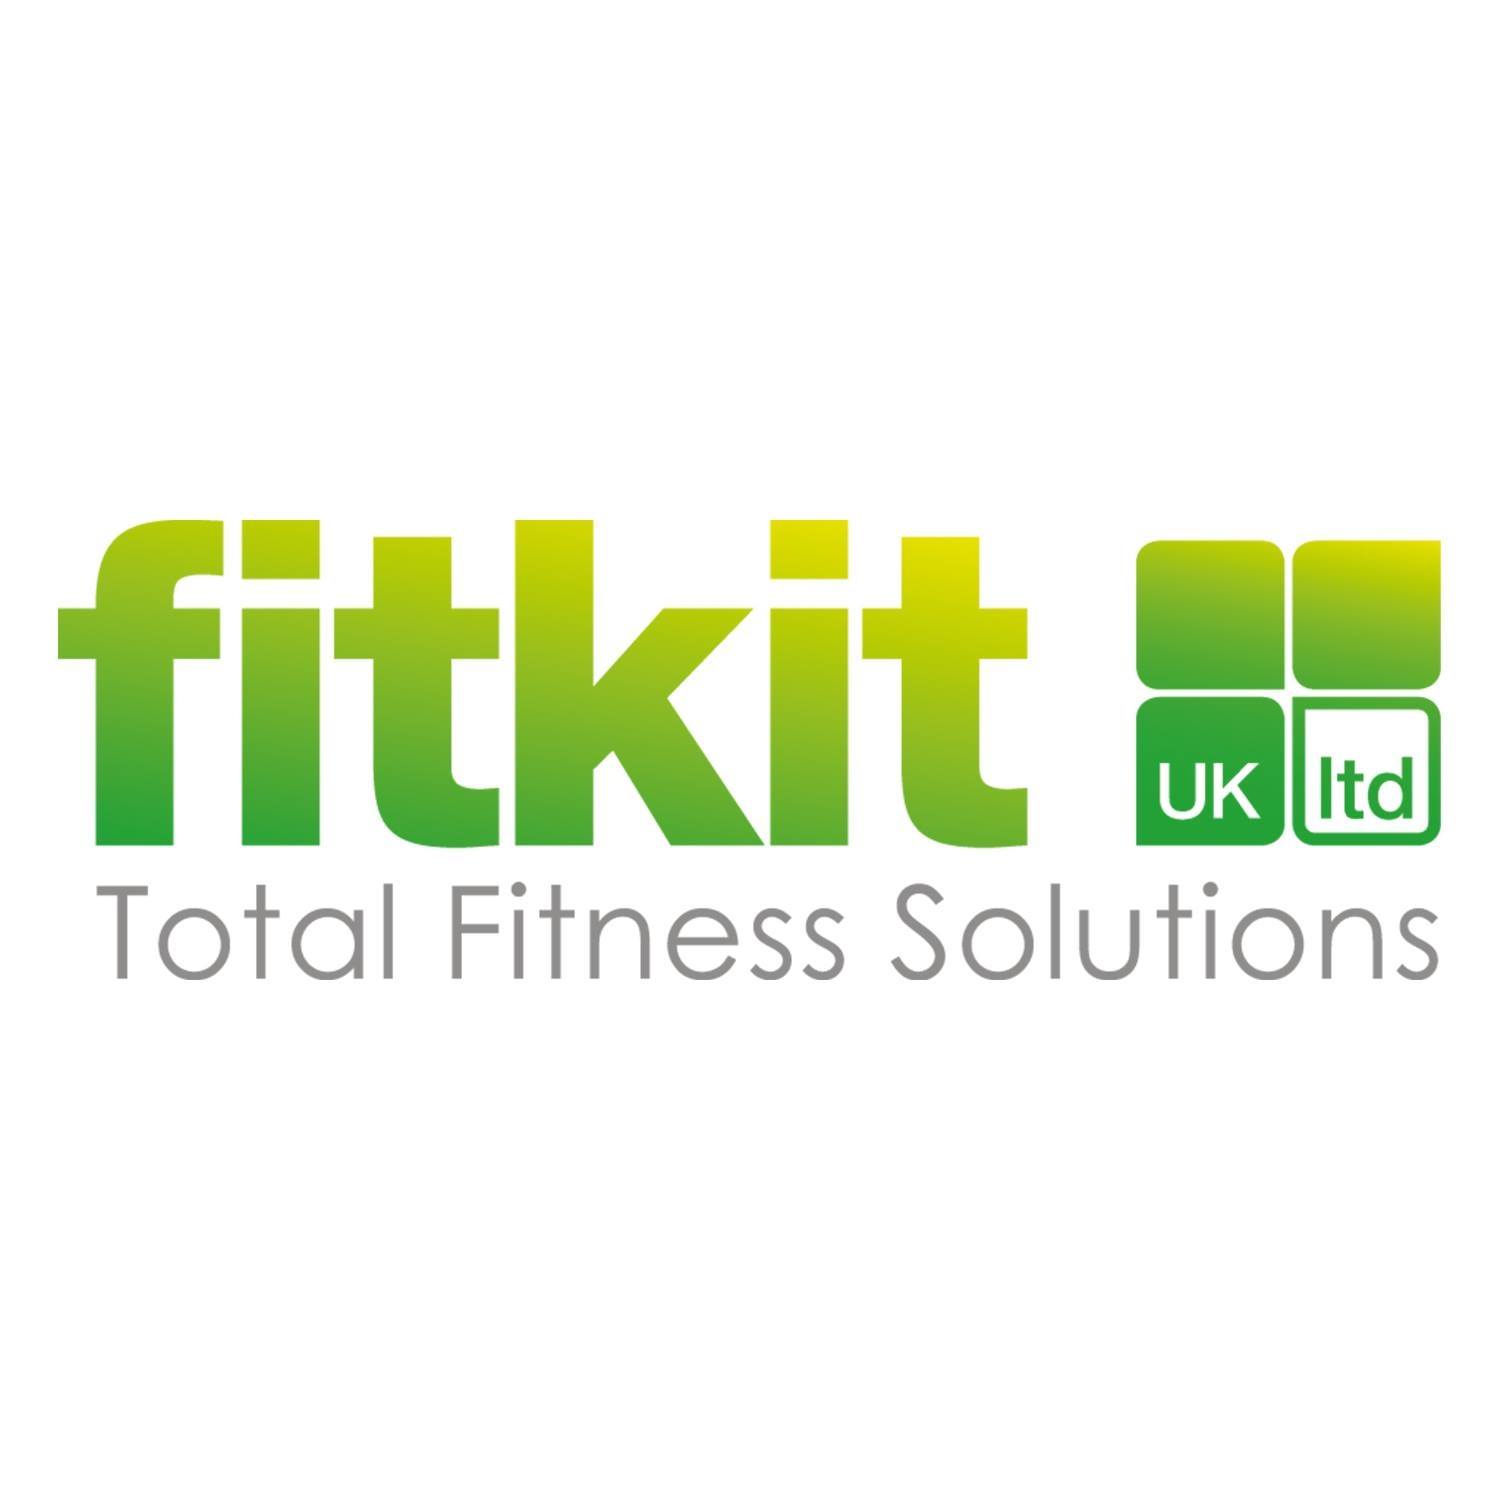 FitKit Coupons & Promo Codes